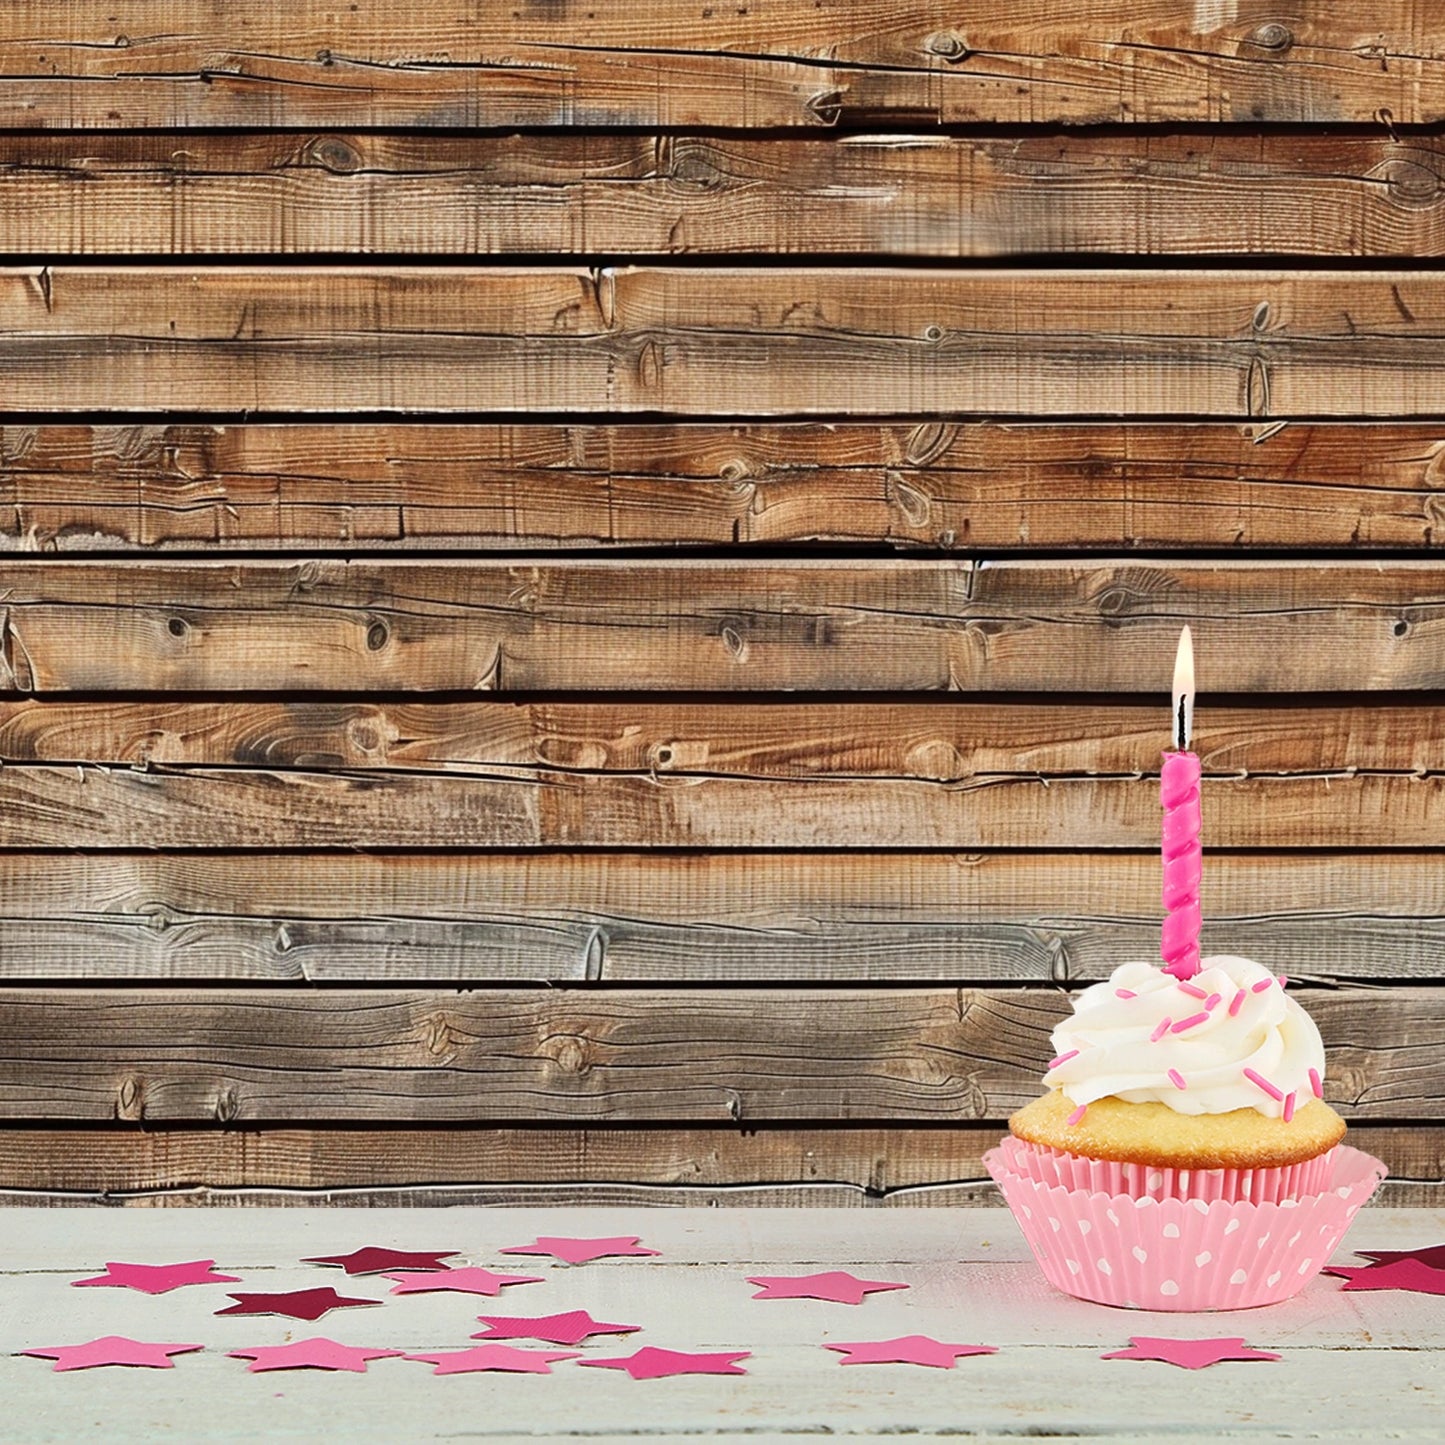 A single cupcake with white frosting and a pink candle is placed on a white surface. Pink star-shaped confetti is scattered around. The ideasbackdrop 7x5ft Wood Backdrops for Photography Worn Wooden Boards Background Brown Photo Wall Photo Studio enhances the charm of this delightful scene.